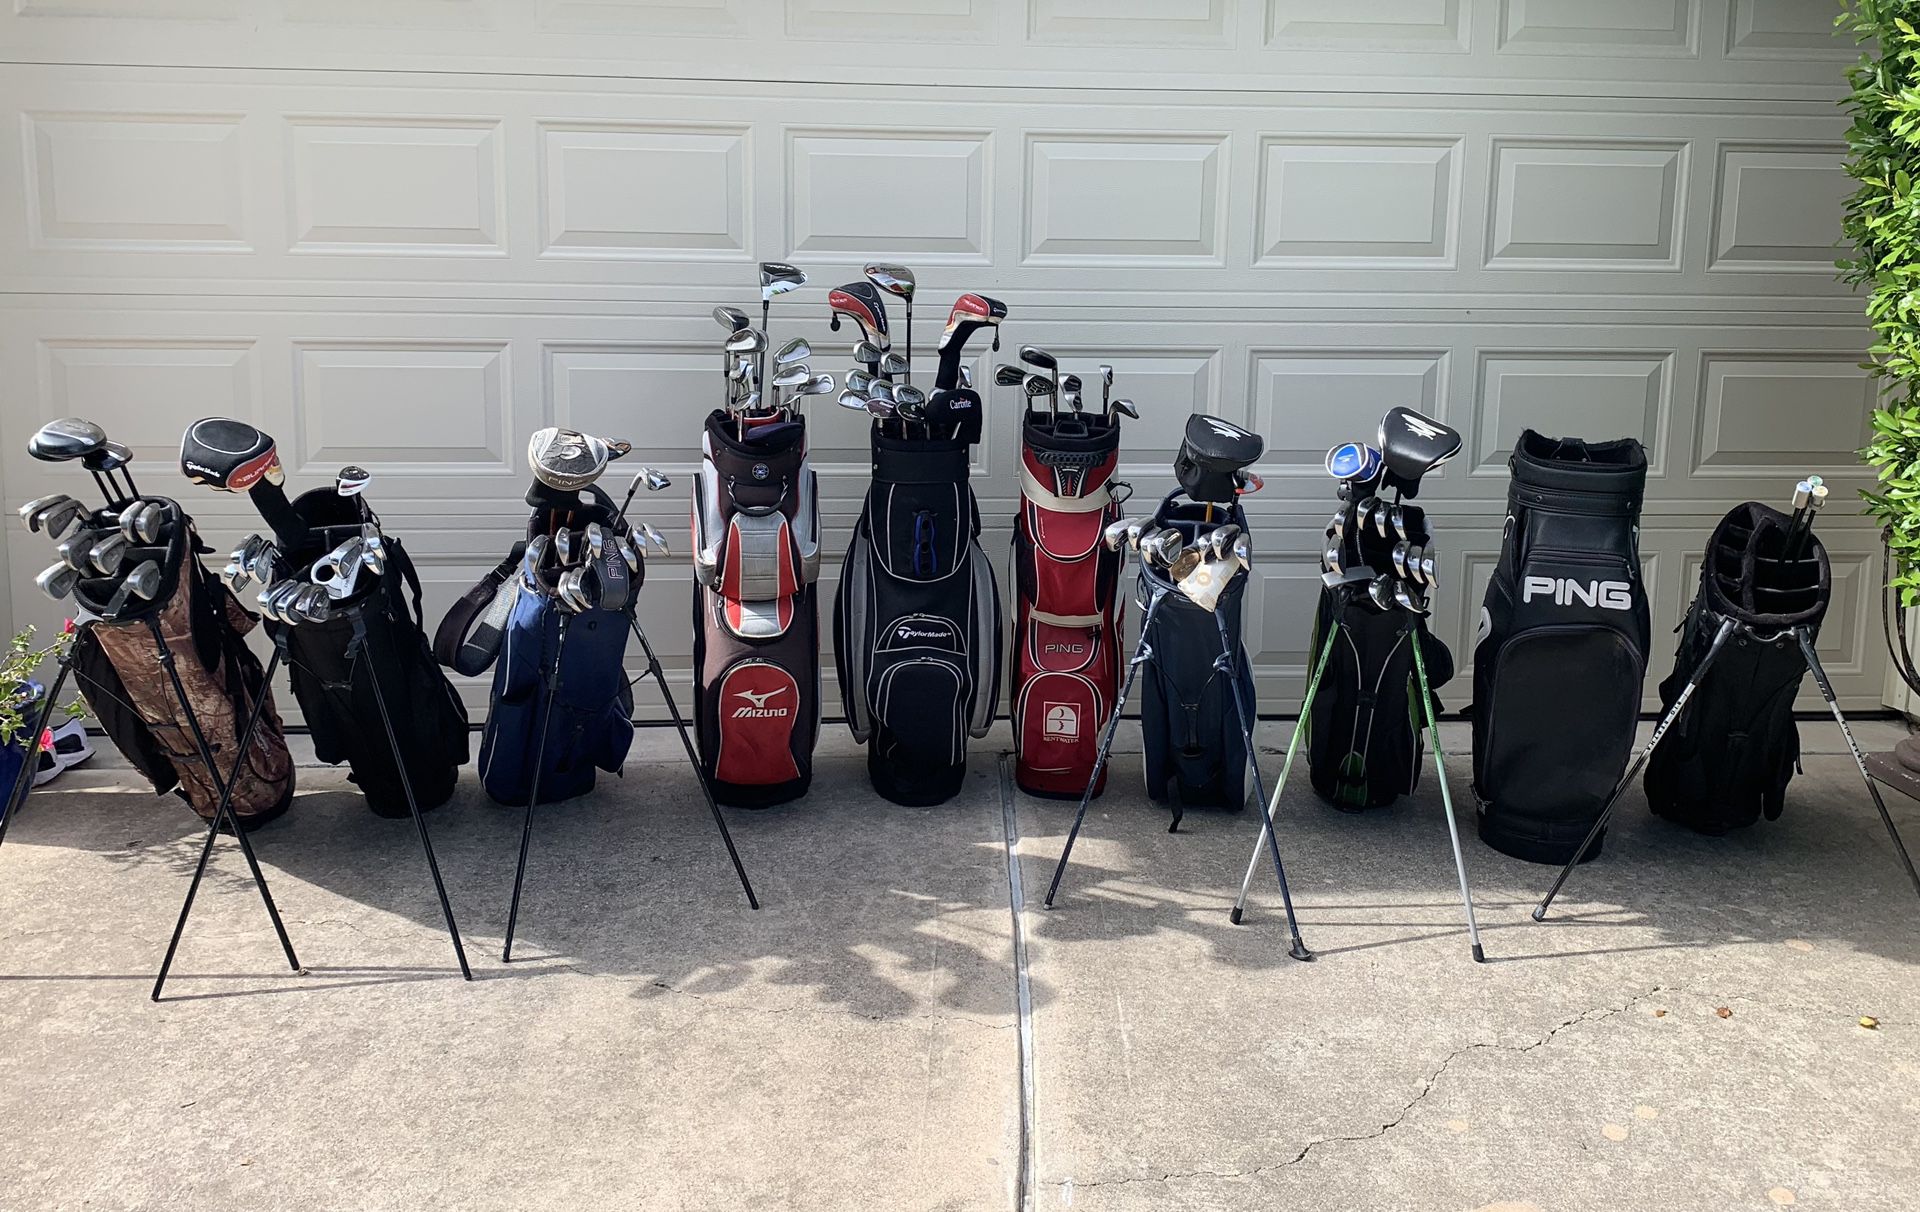 Mens Complete Golf Sets - Right & Left Handed - Ping Cart Bag - Swing Sticks Training Setup - Please Read Prices In Description 